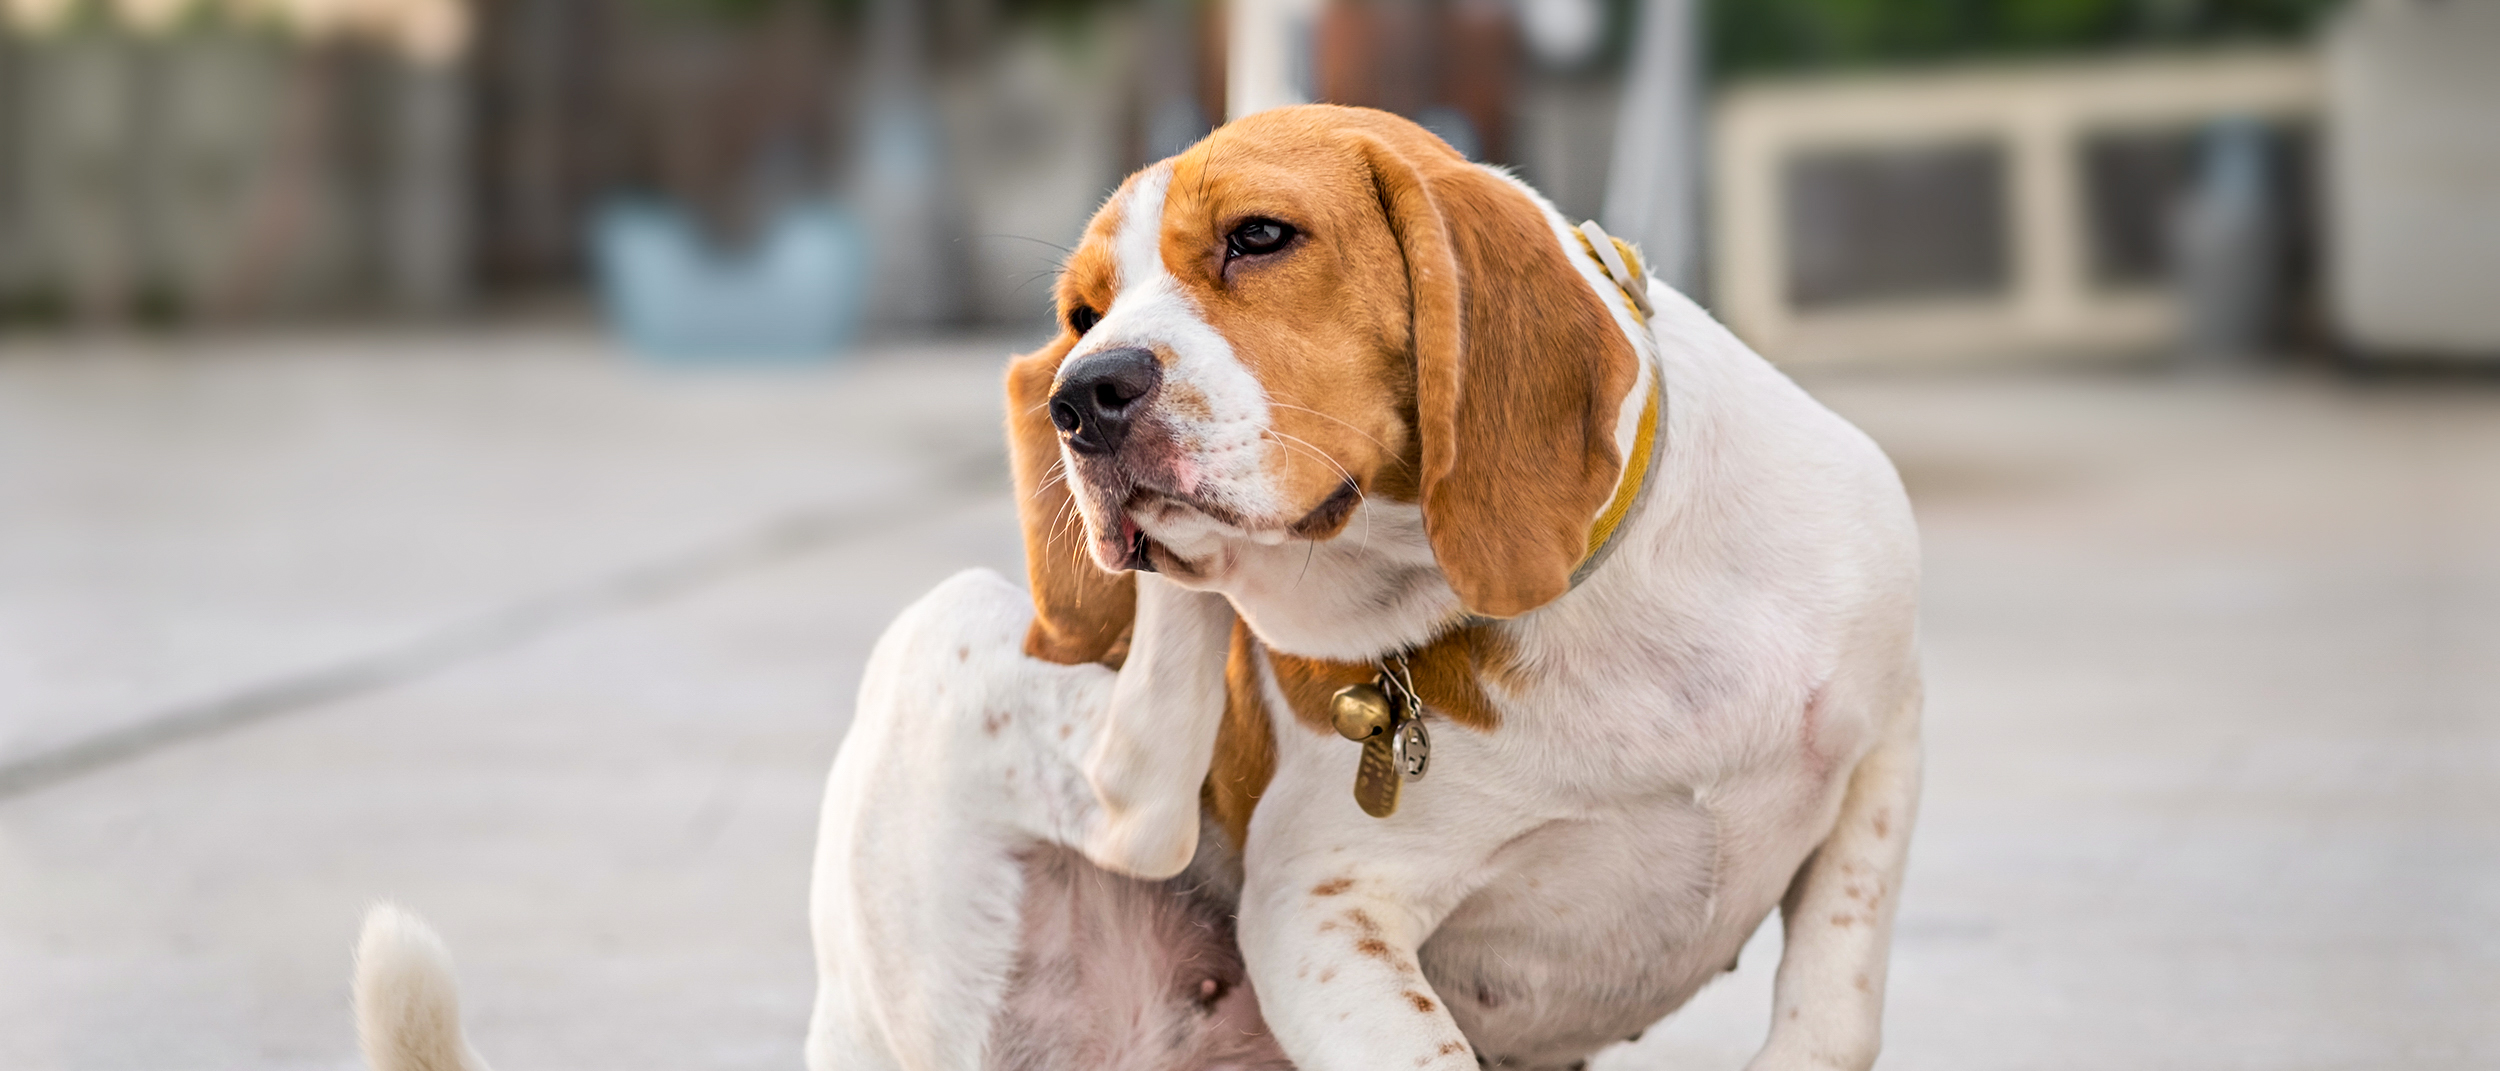 Adult Beagle sitting outdoors scratching its ear.